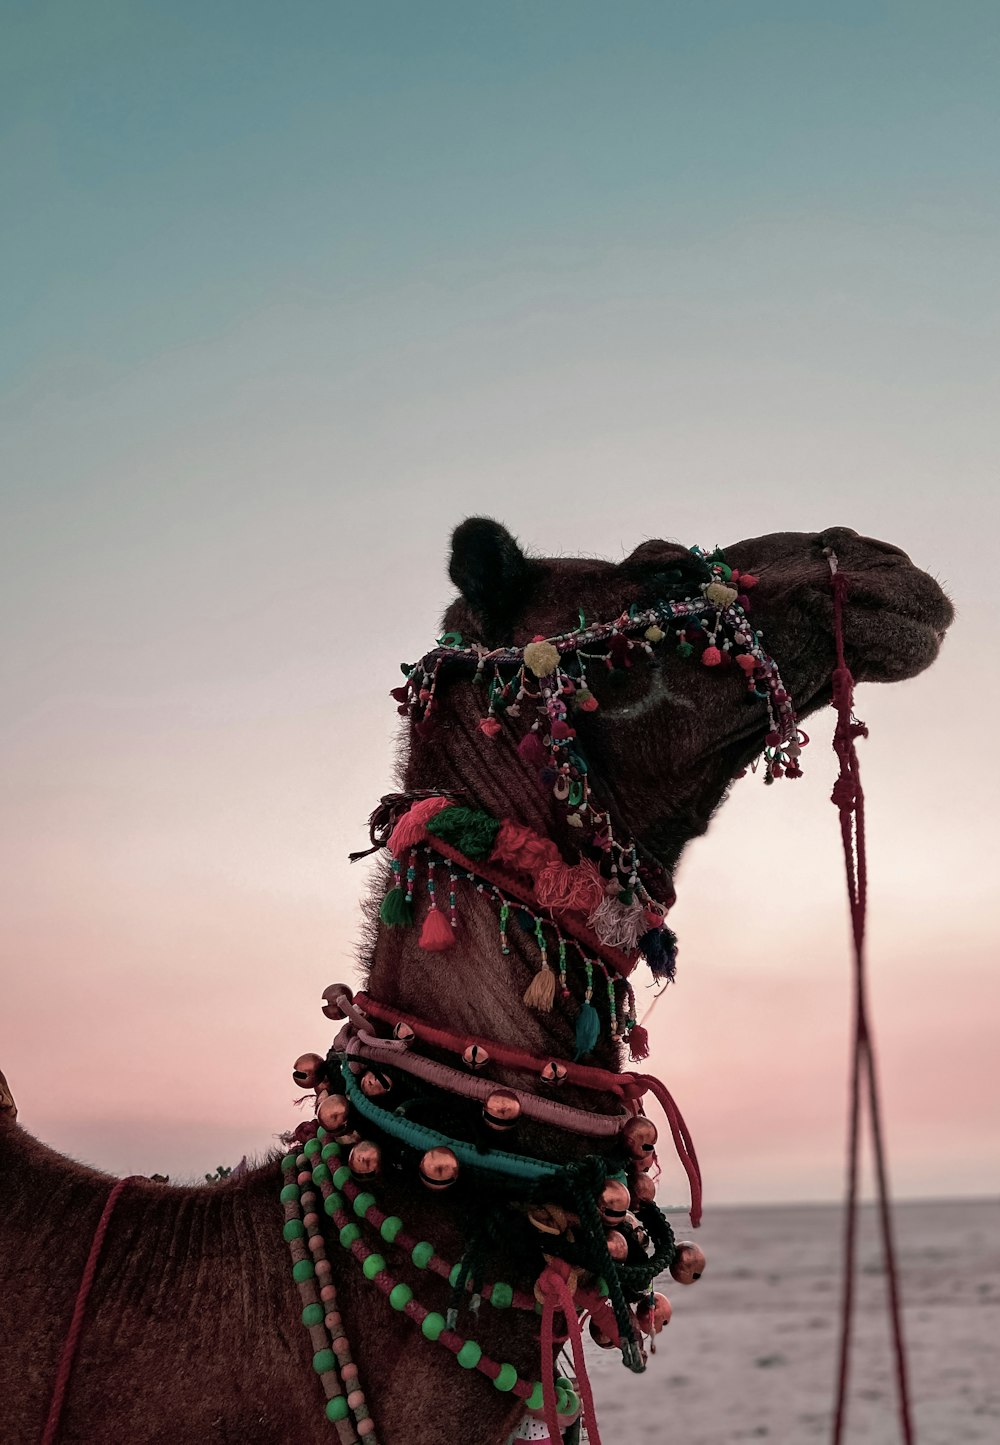 a close up of a camel near the ocean